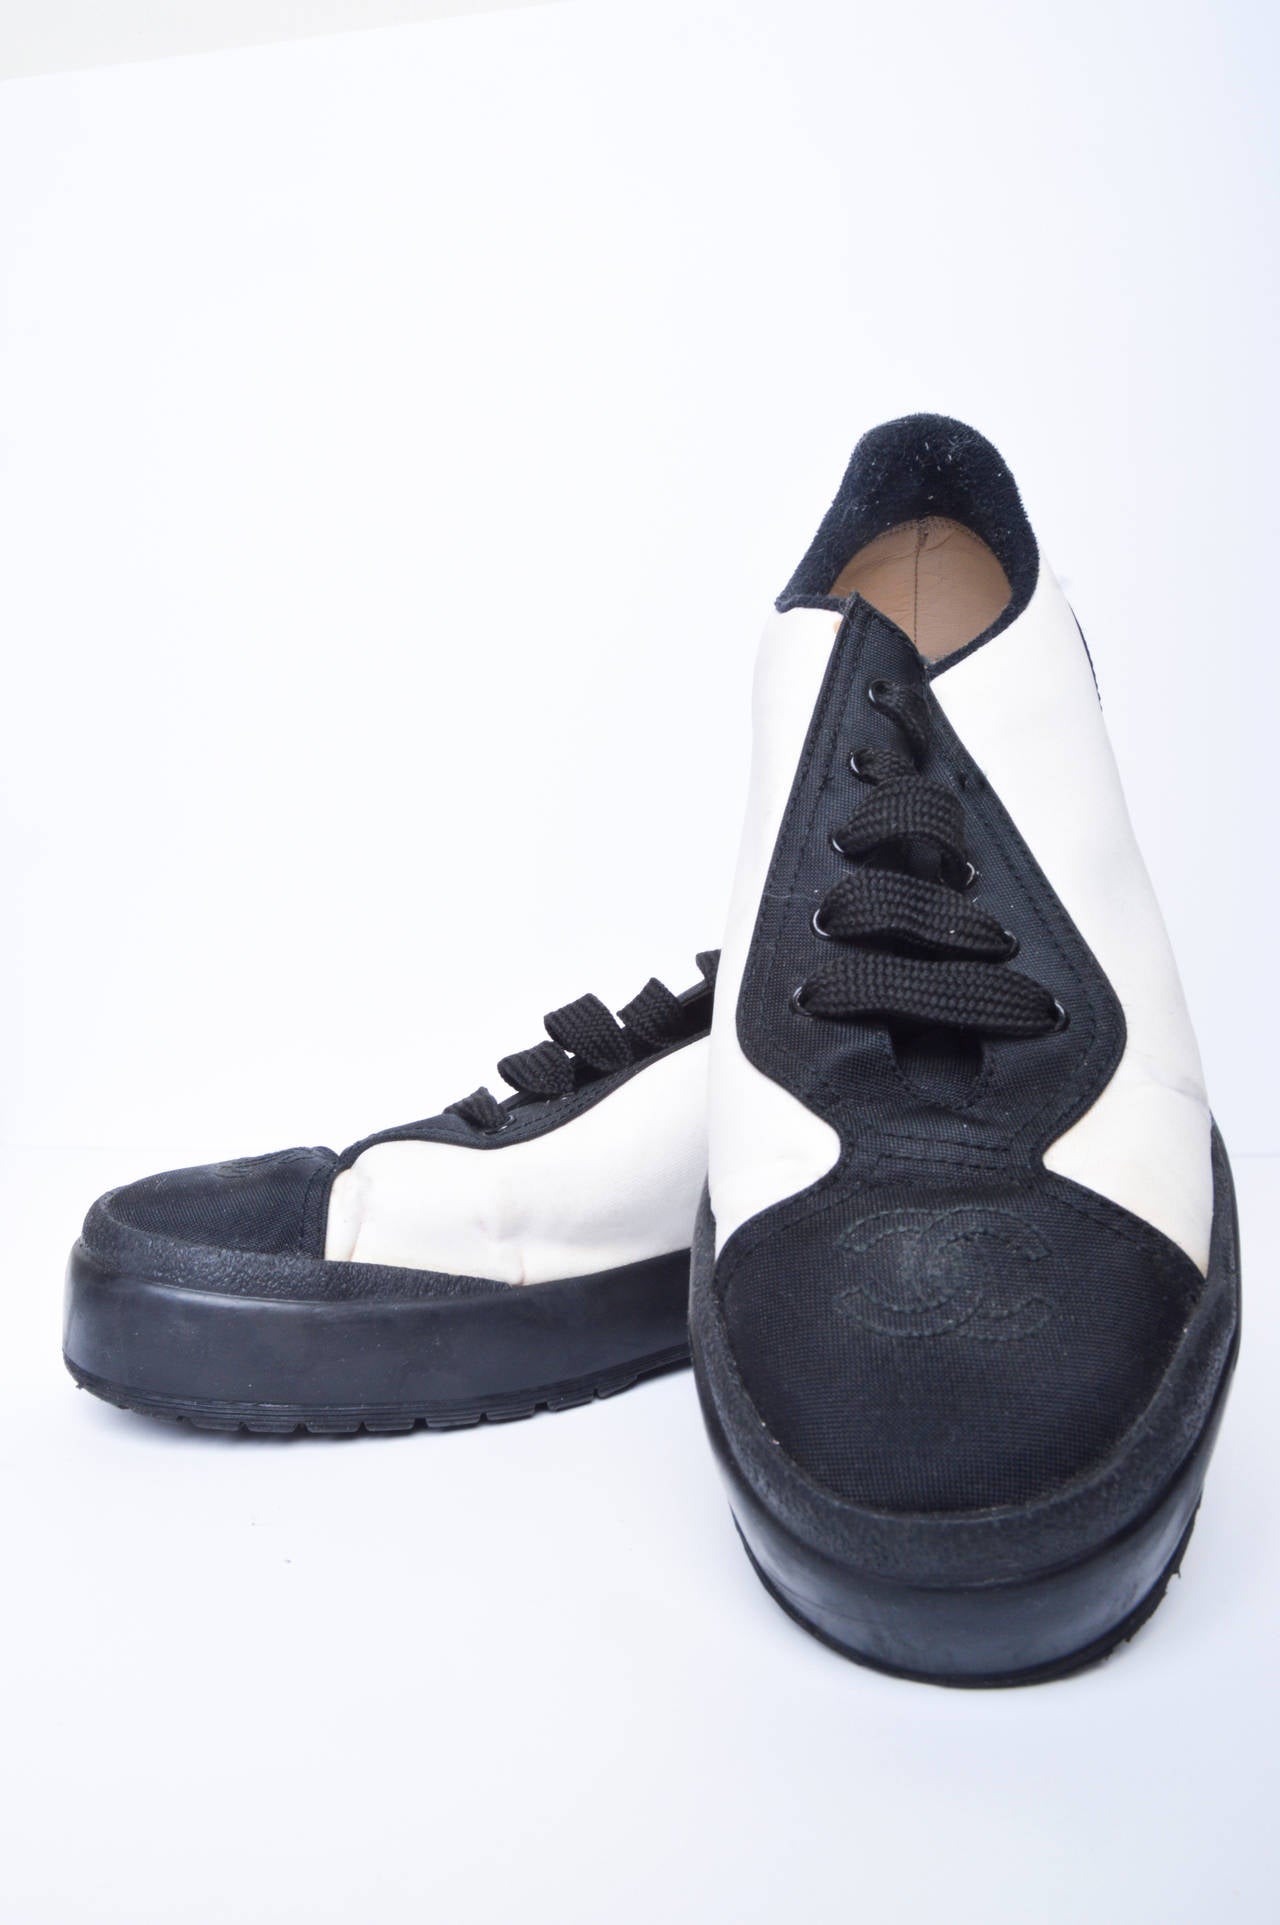 Chanel Black and Off-White Athletic Shoes Size 38 1